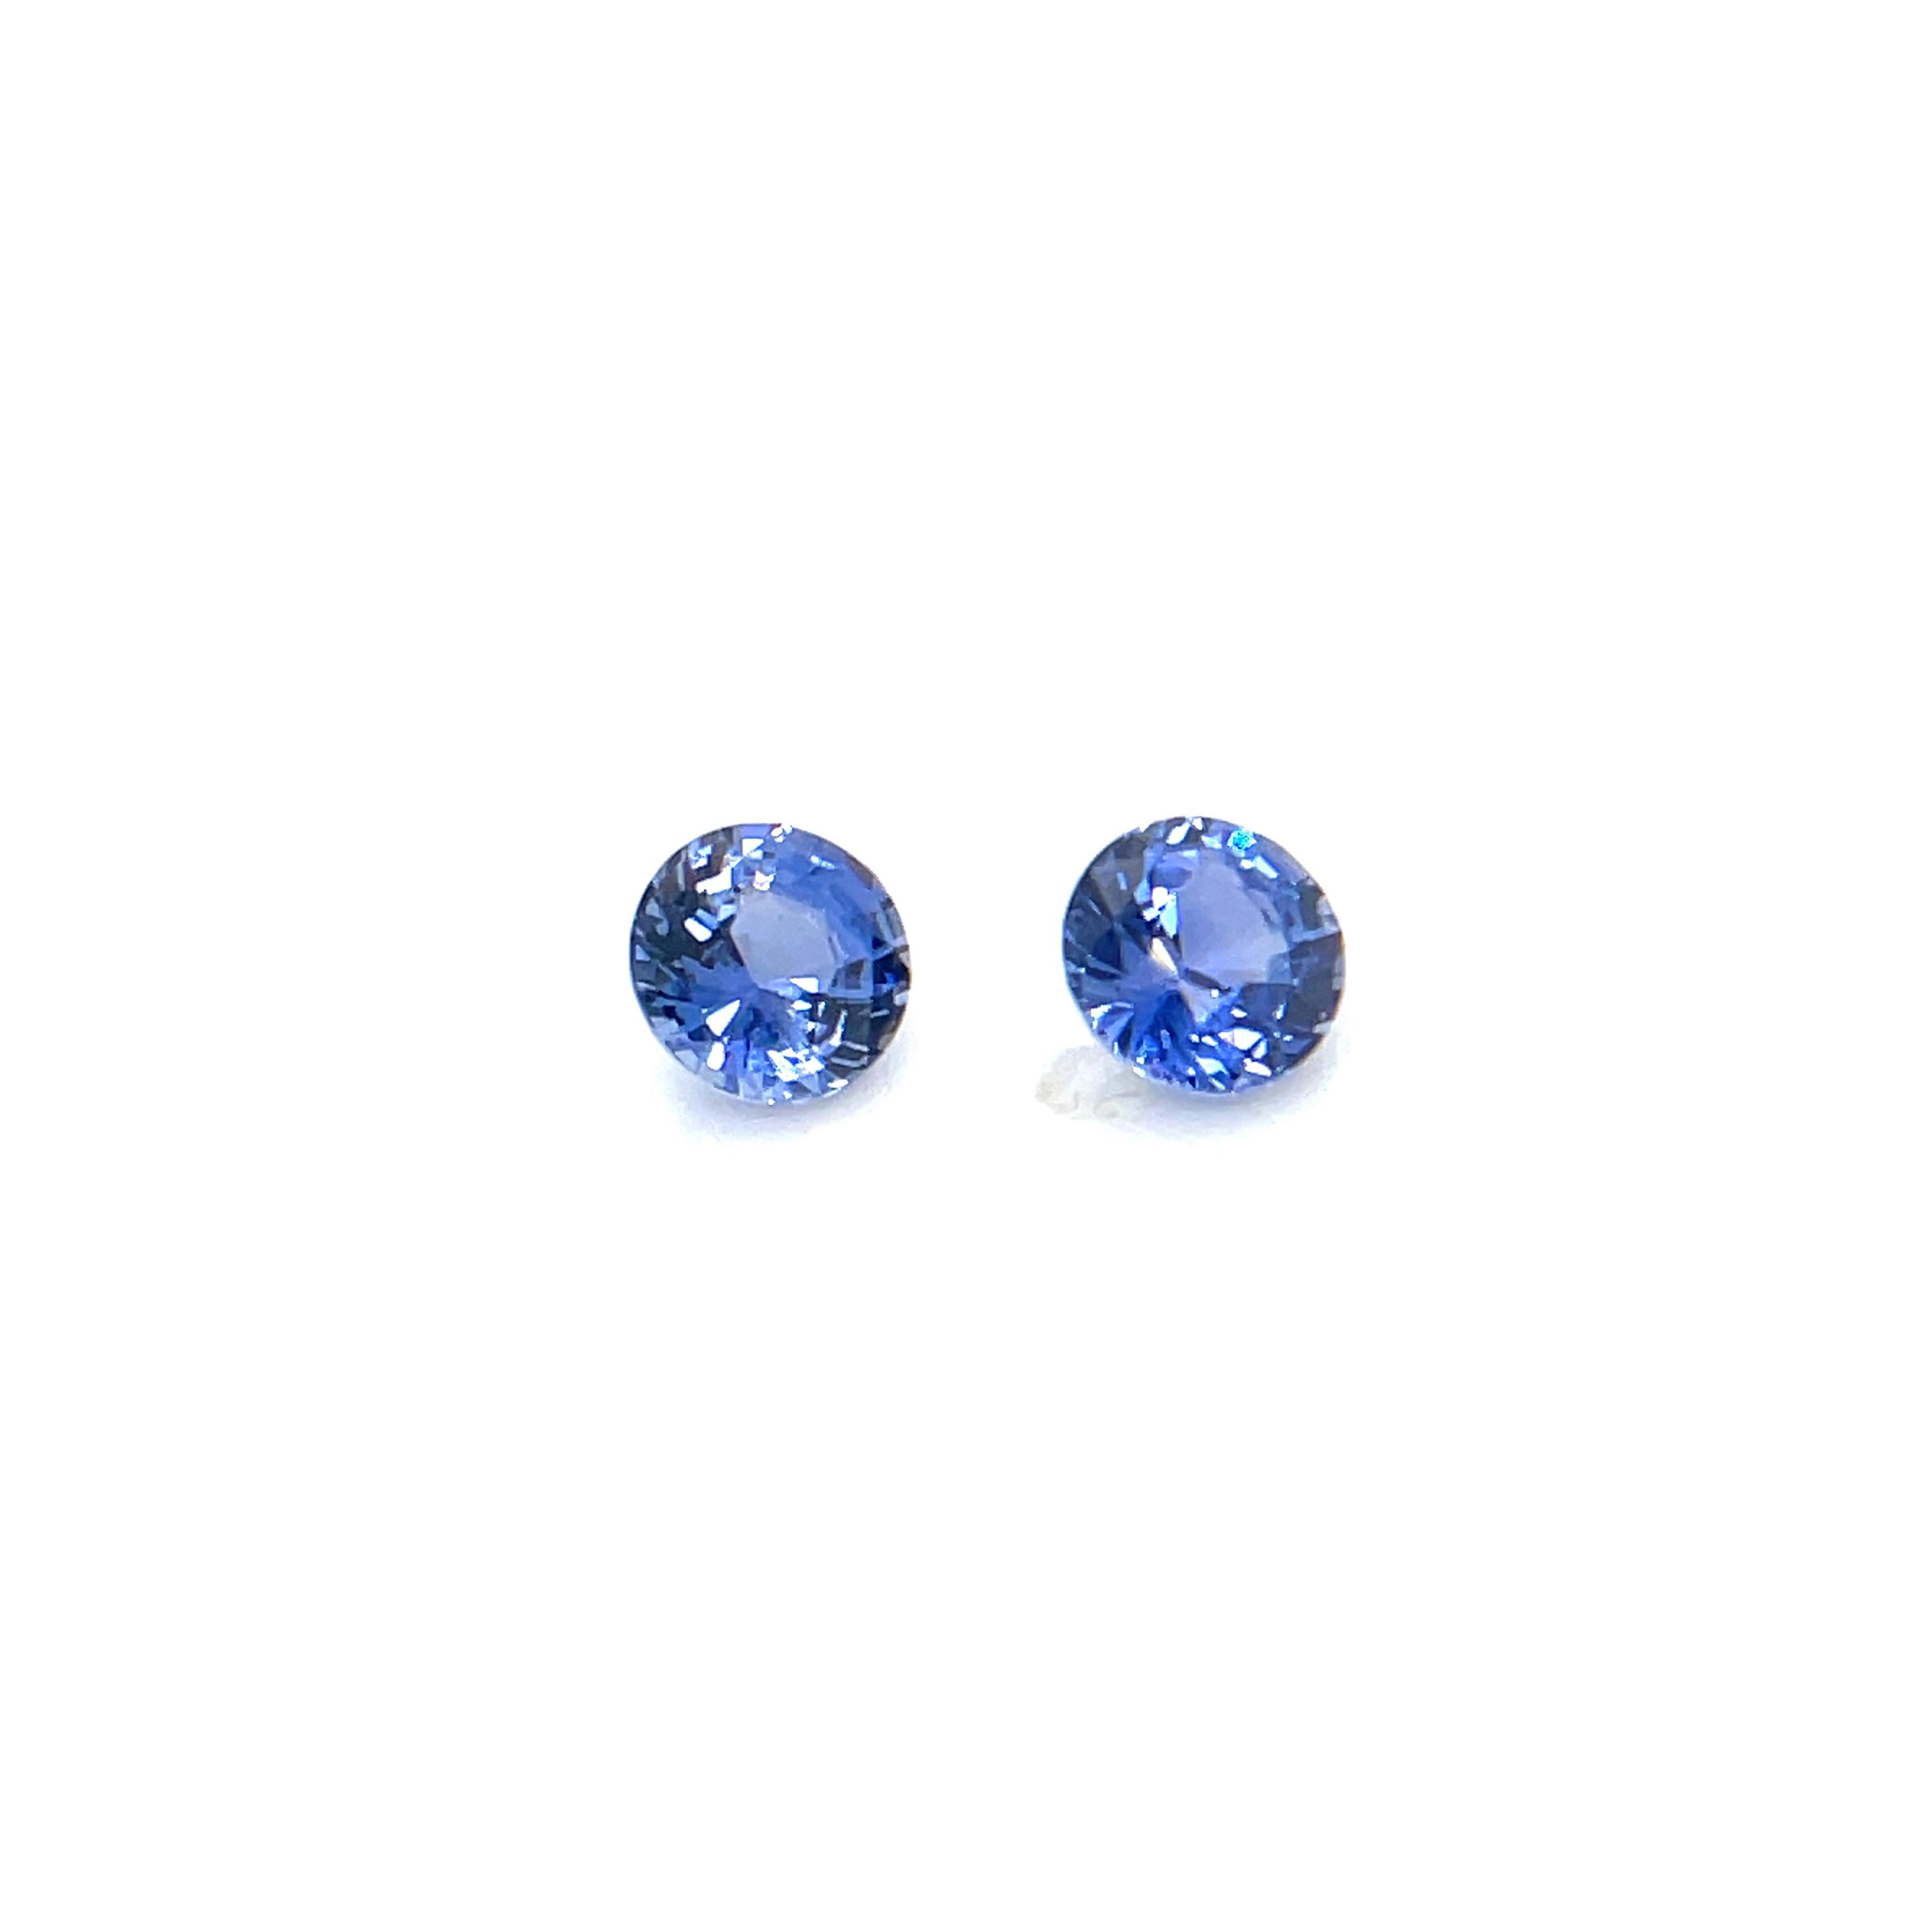 Contemporary 2 Natural Round Diamond-Cut Blue Sapphires Cts 1.21 For Sale